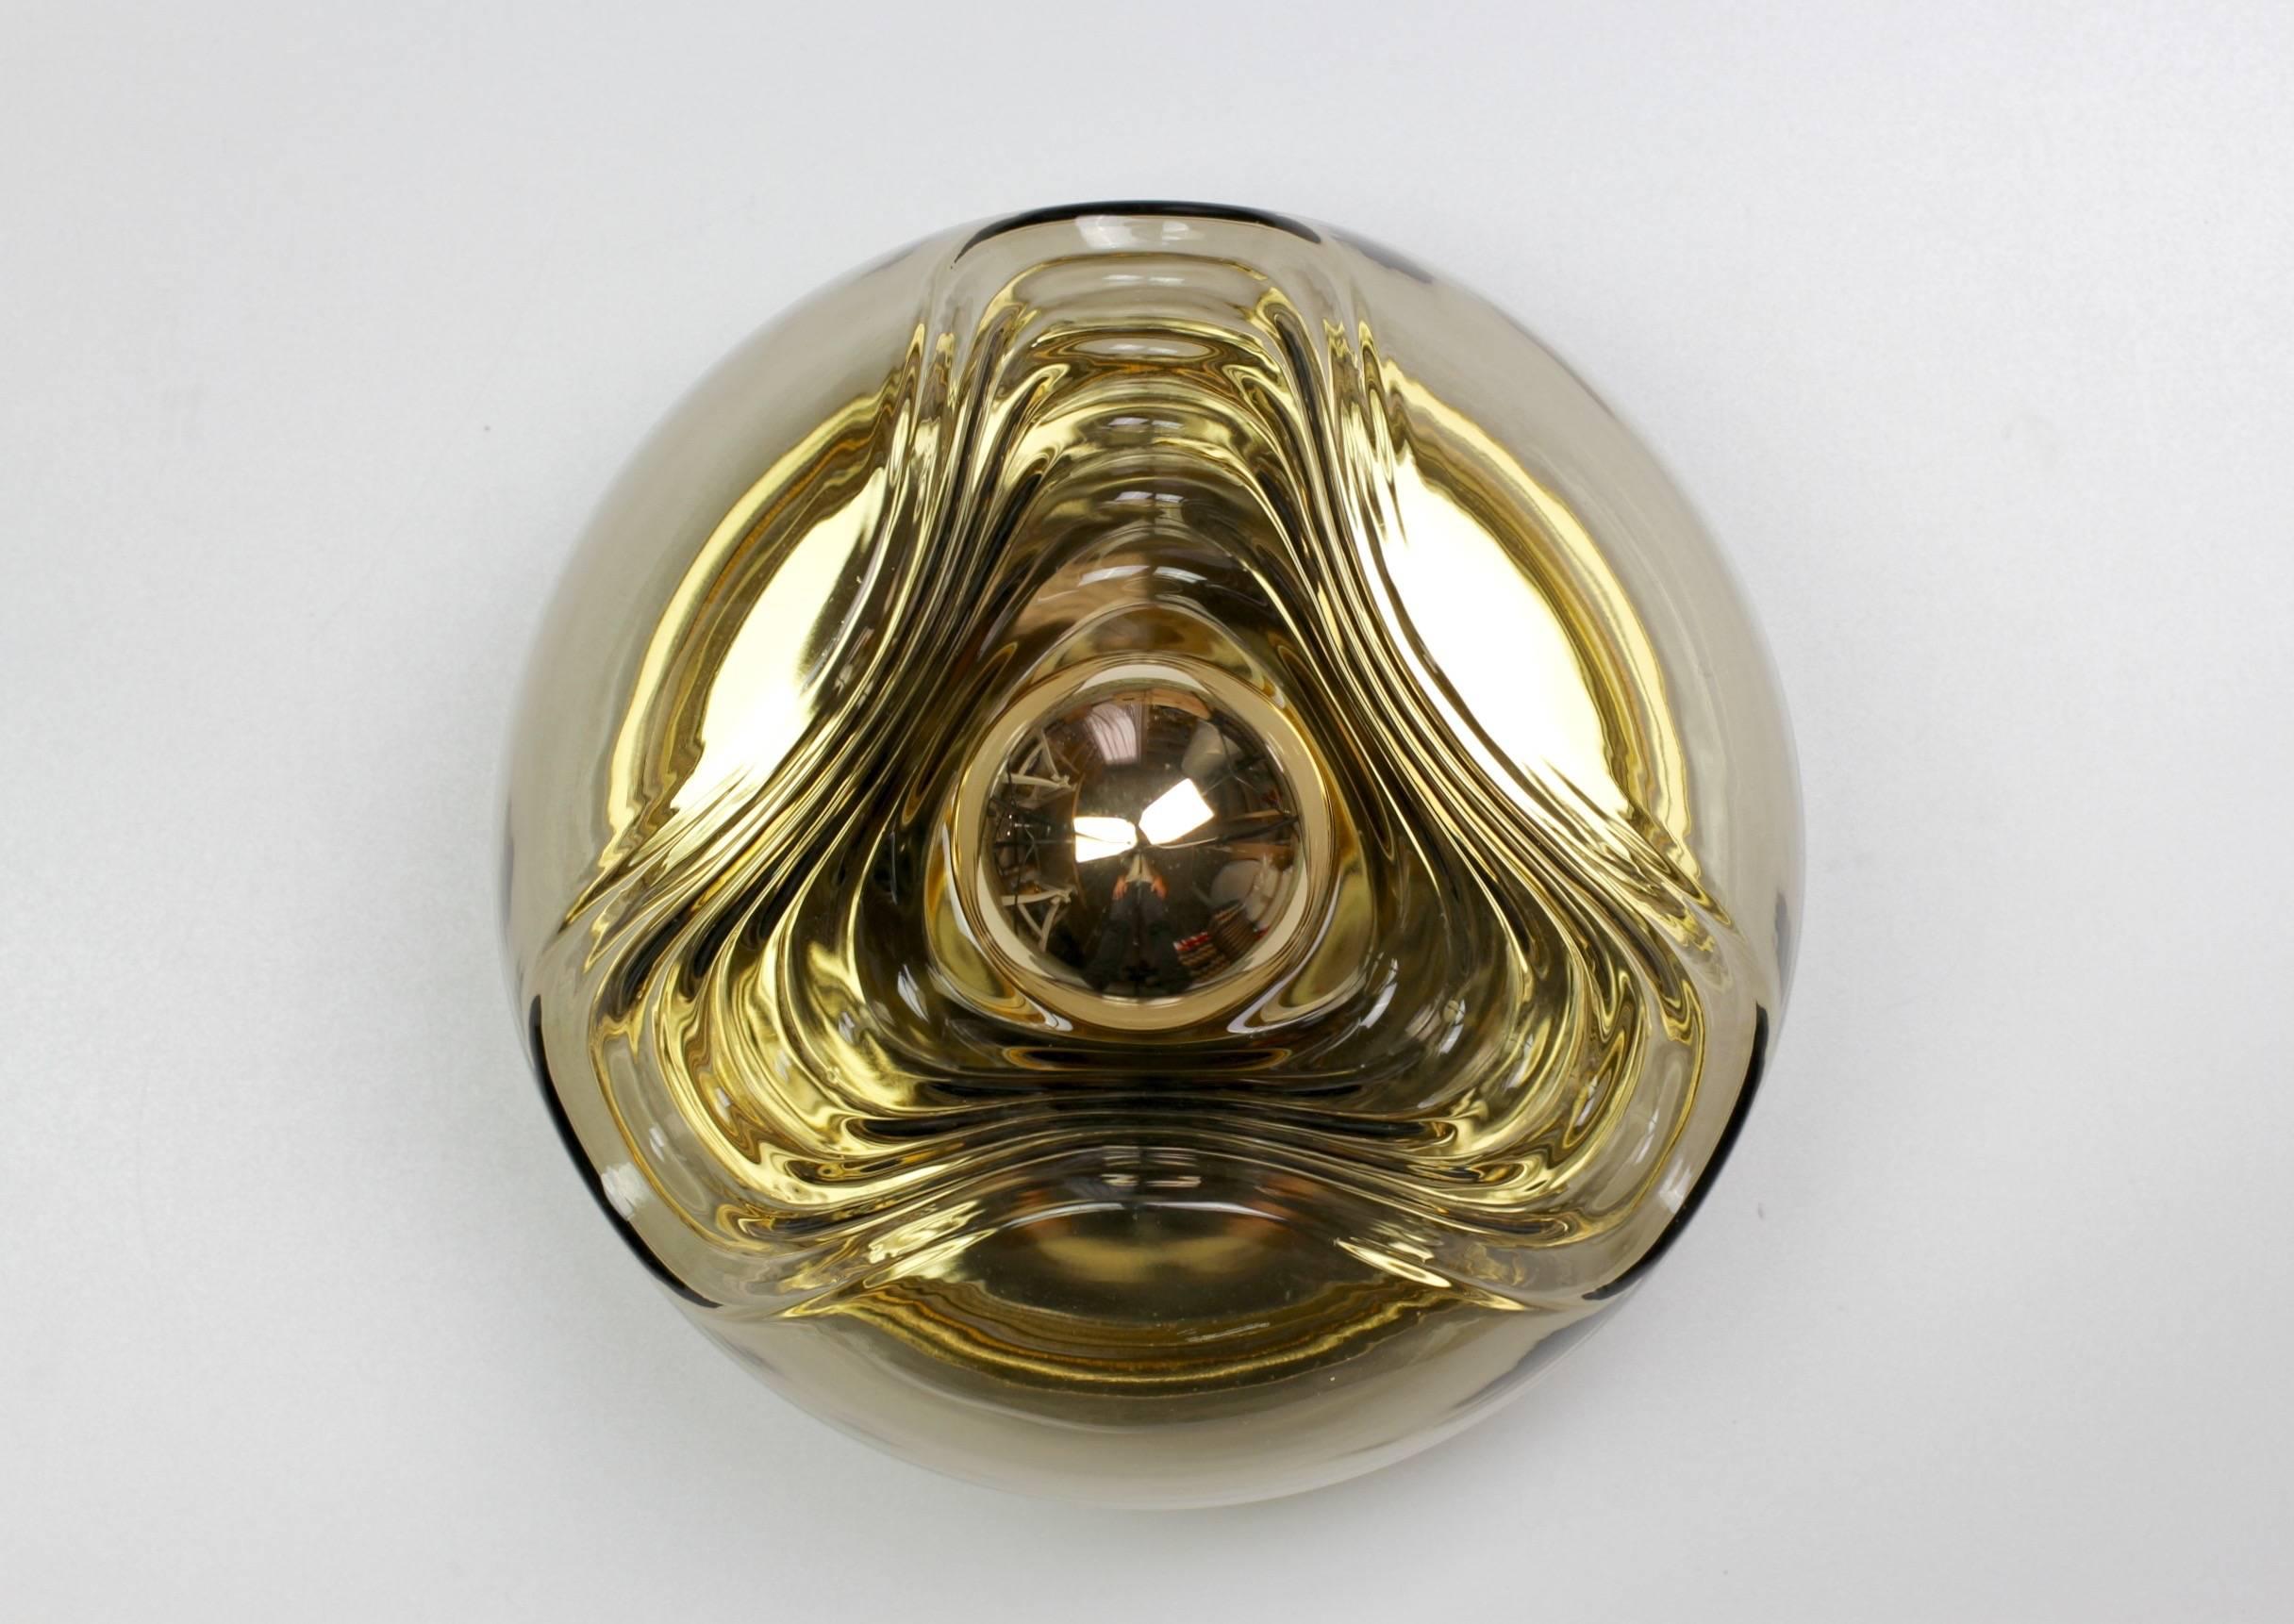 Beautiful Mid-Century flush mount wall light or sconce designed by Koch & Lowy for Peill & Putzler in the 1970s. This is an absolutely Classic piece of design, featuring a smoked colored (colored) glass globe shade with a waved/ribbed molded